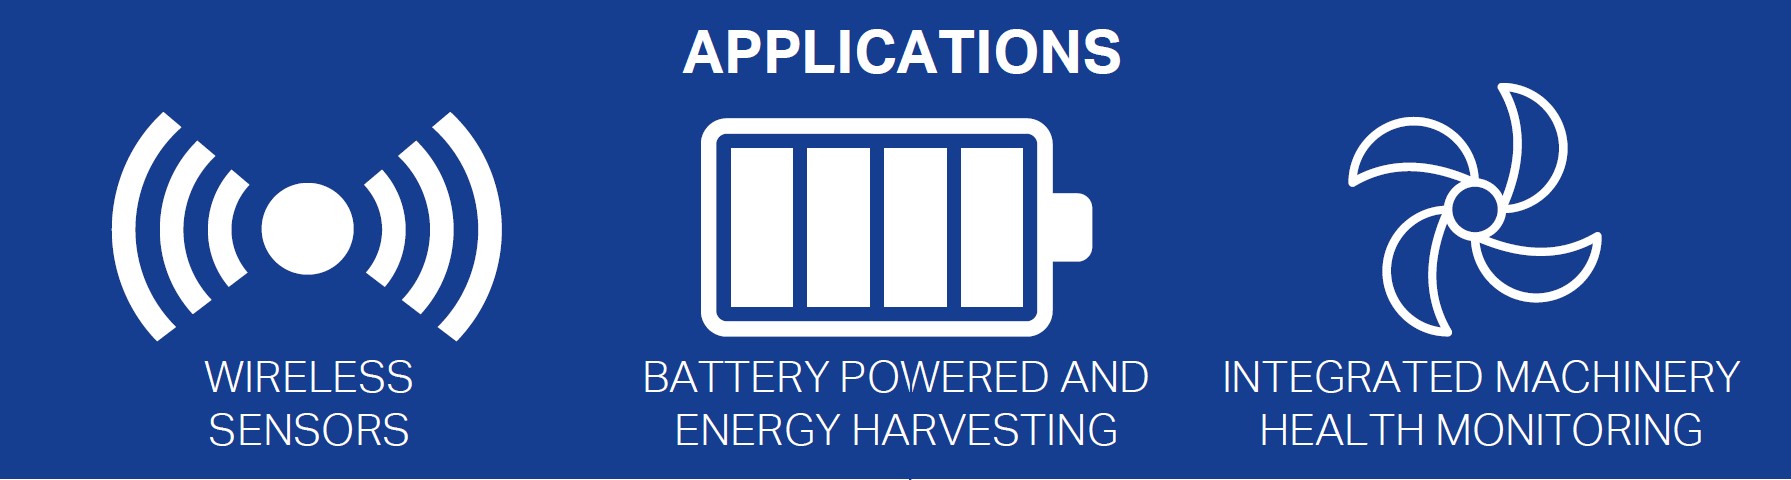 Applications for the LVEP-TO5 include wireless vibration sensors, battery powered vibration sensors, accelerometers powered by energy harvesting, and integration into industrial machinery for self-diagnostics and machinery health monitoring. 